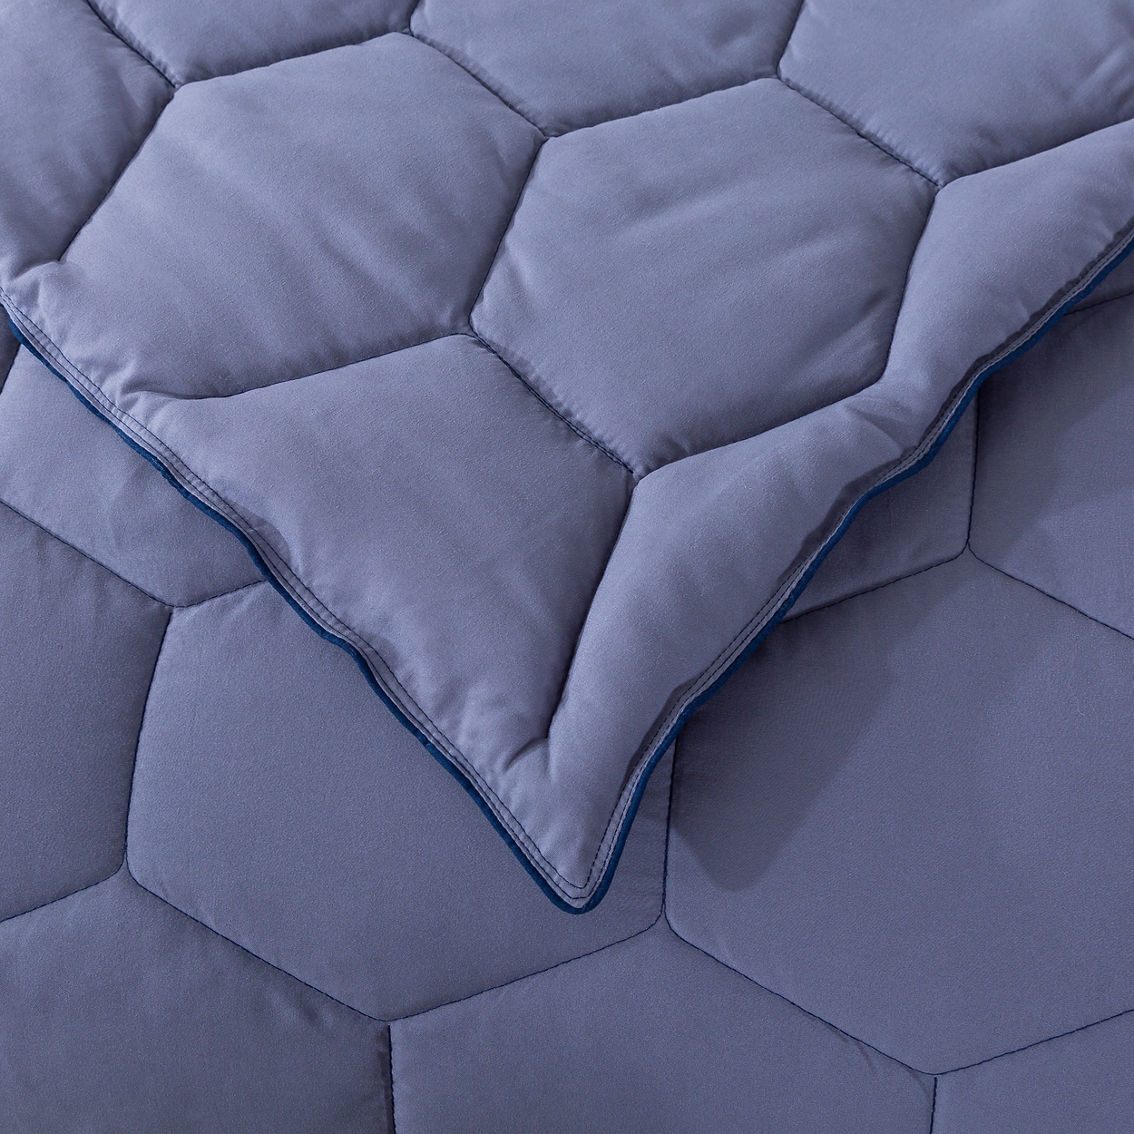 Honeycomb Color Contrast Stitched Down Alternative Blanket - Image 4 of 5